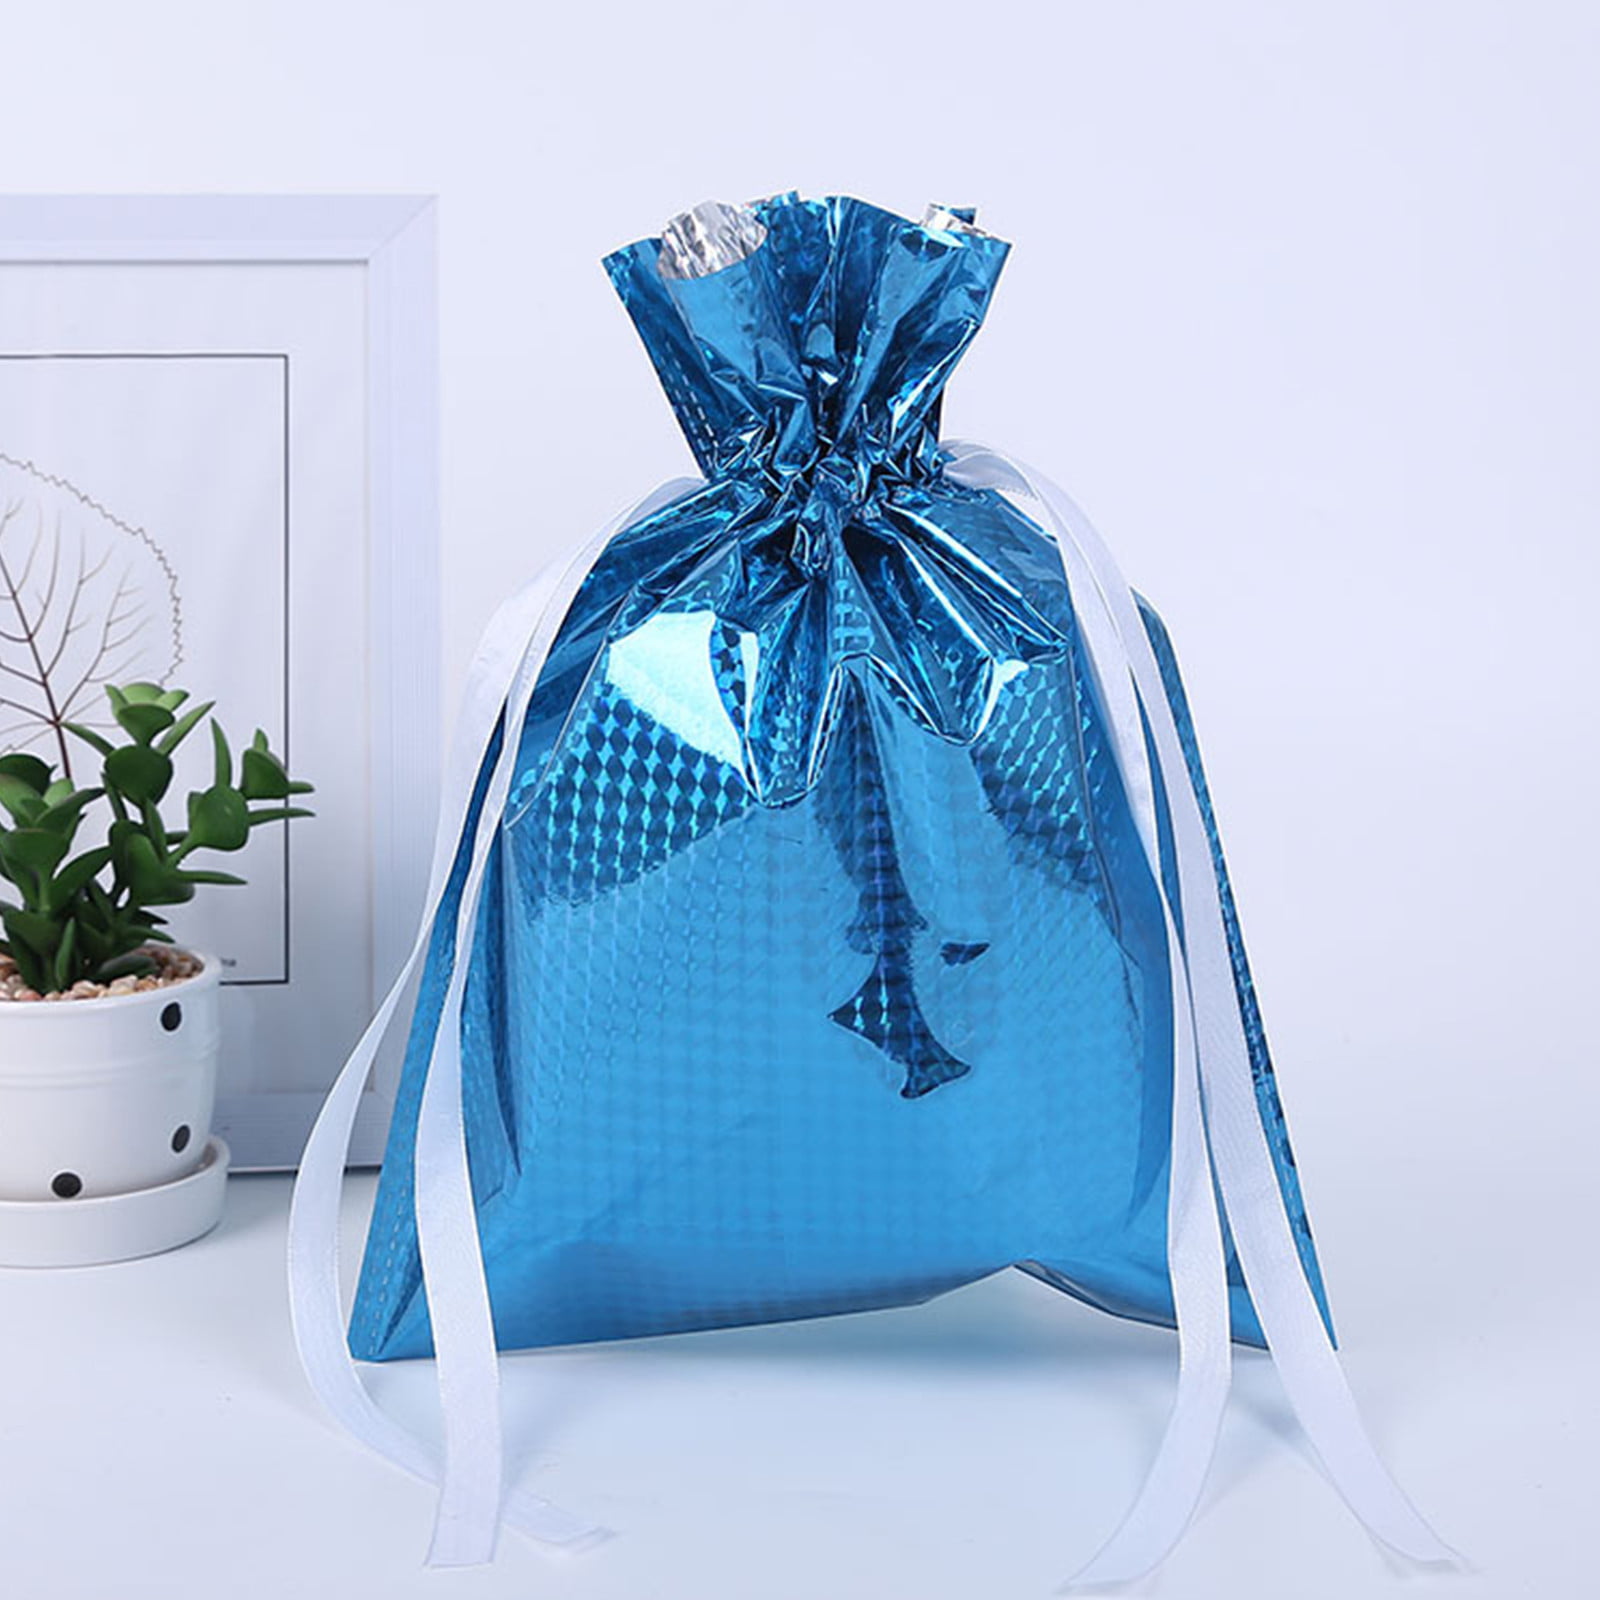 Details about   Gift Packaging Plastic Bags For Party Needs Cute Designs Cookie Candy Bag 100pcs 